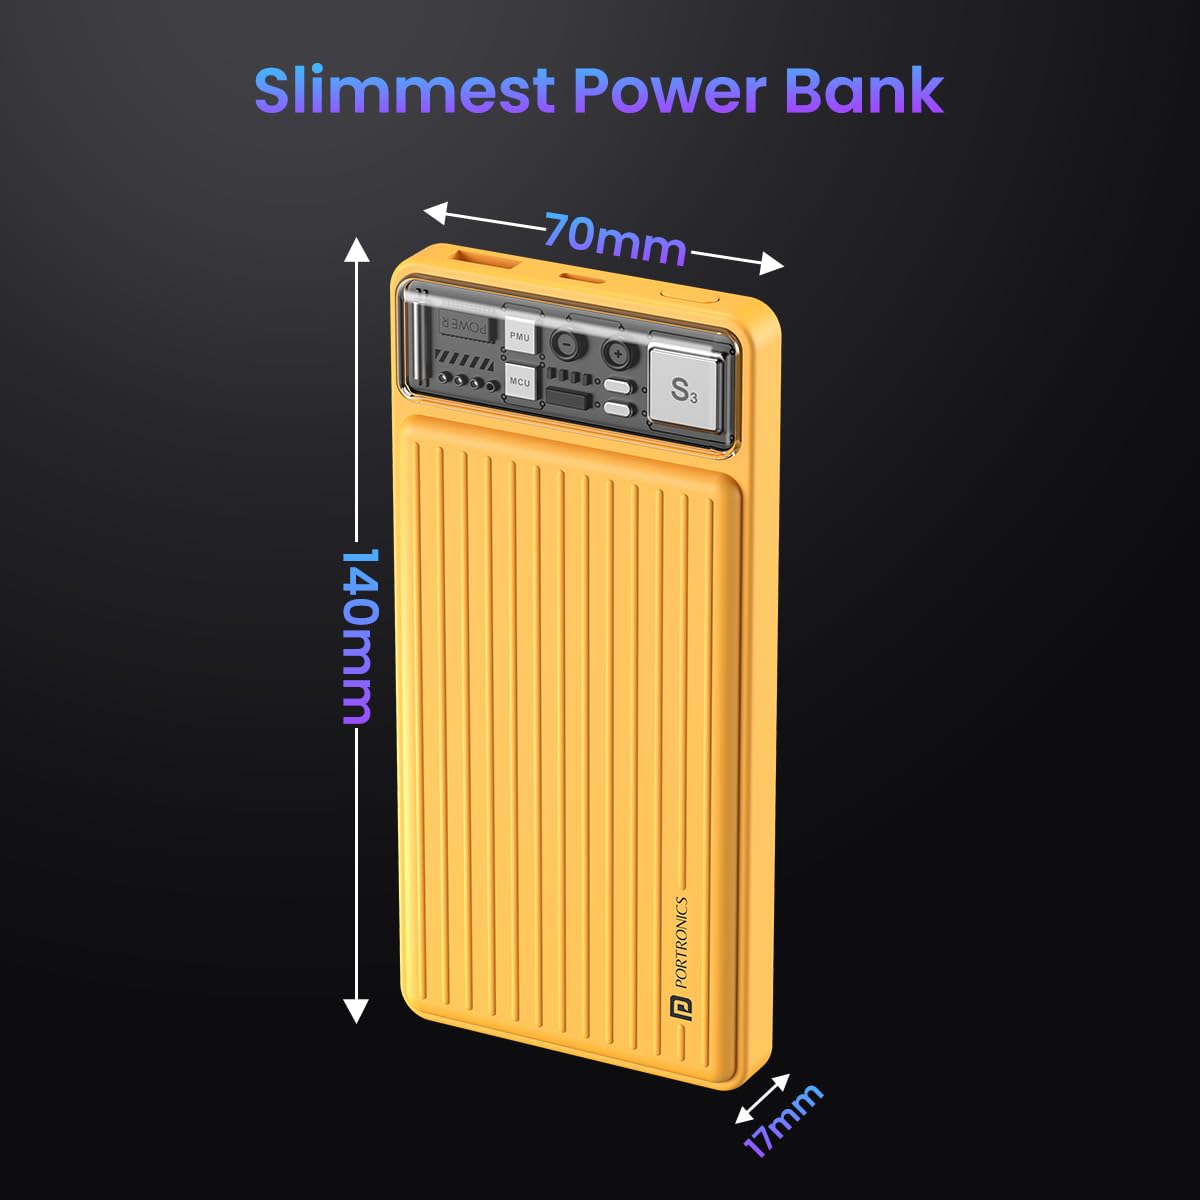 Portronics Luxcell 10K 10000 mAh Designer Power Bank with 22.5W Max Output, LED Indicator, Mach USB-A Output, Type C PD Output, Type C Input, Wake Up Button